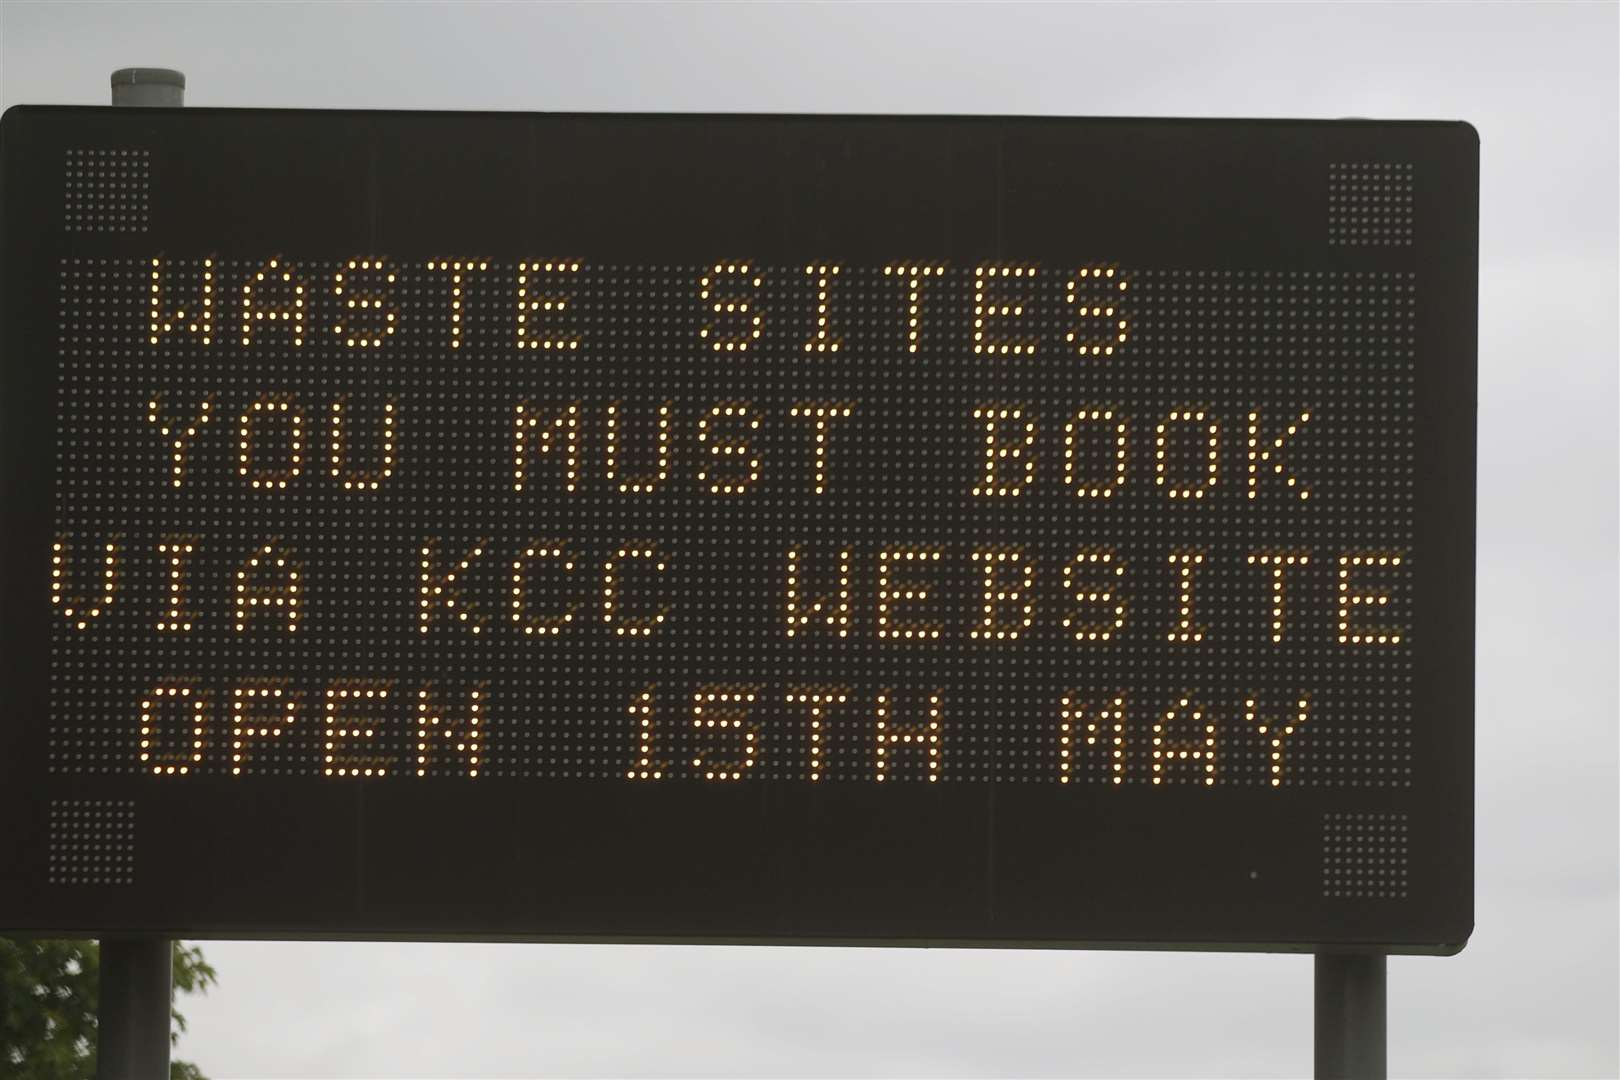 Signs were activated in May 2020 when tips re-opened during the first lockdown, but with a strict booking system